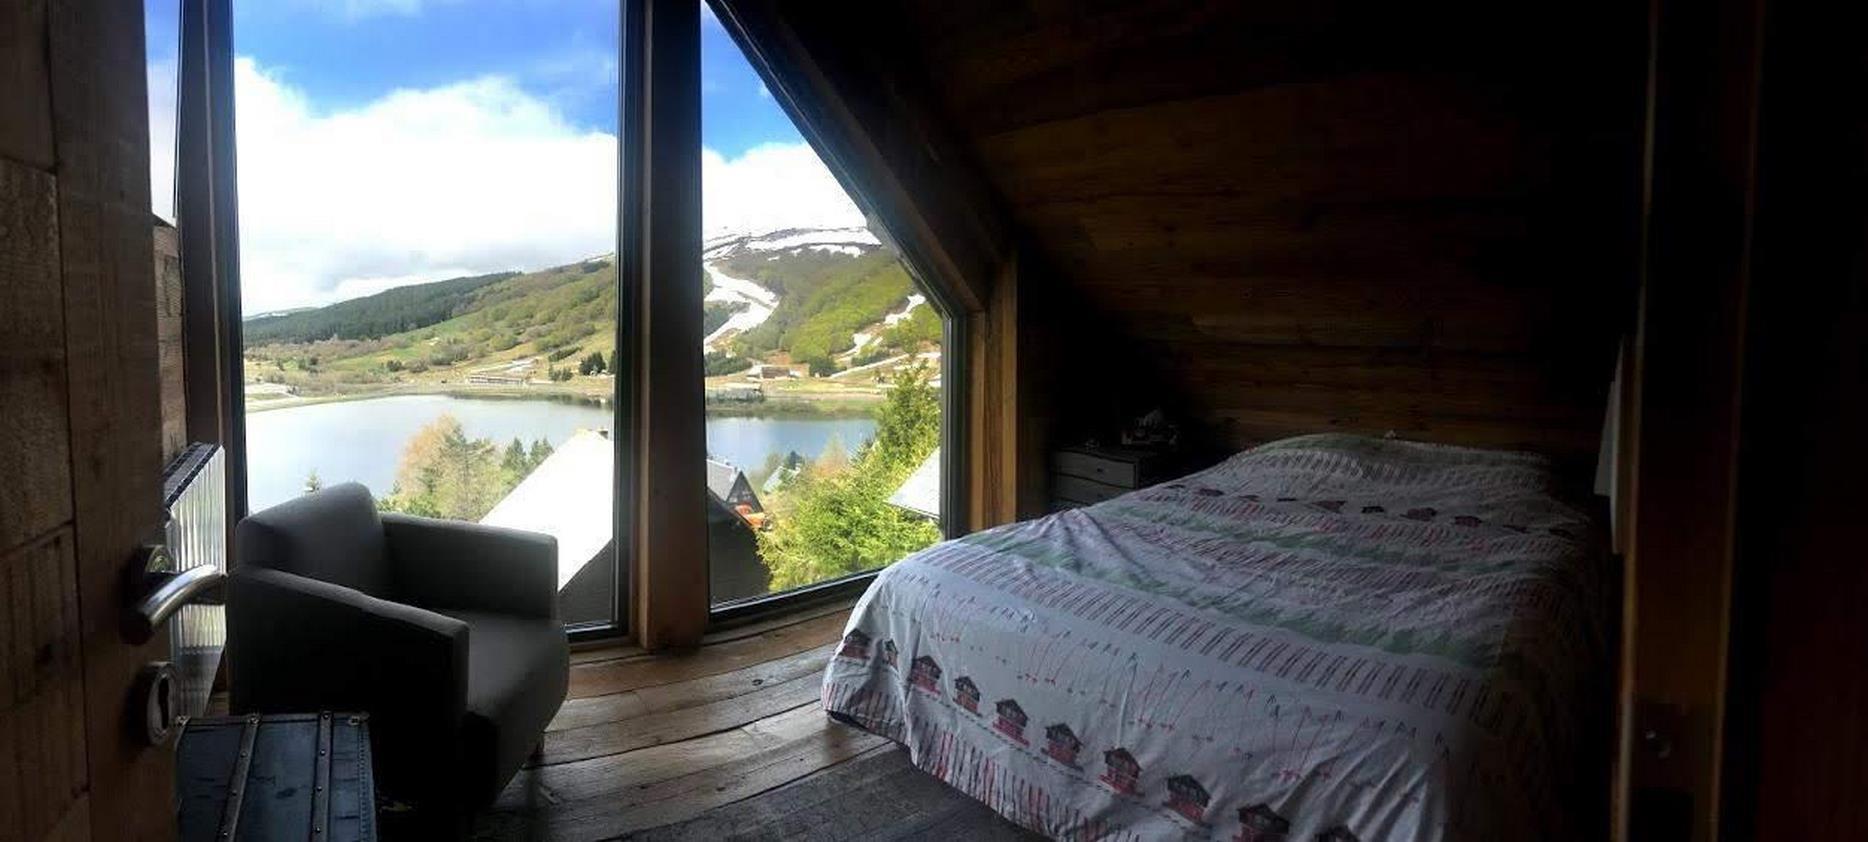 Gite Super Besse - bedroom with king size bed, flat screen, wifi, sound bar and magnificent view